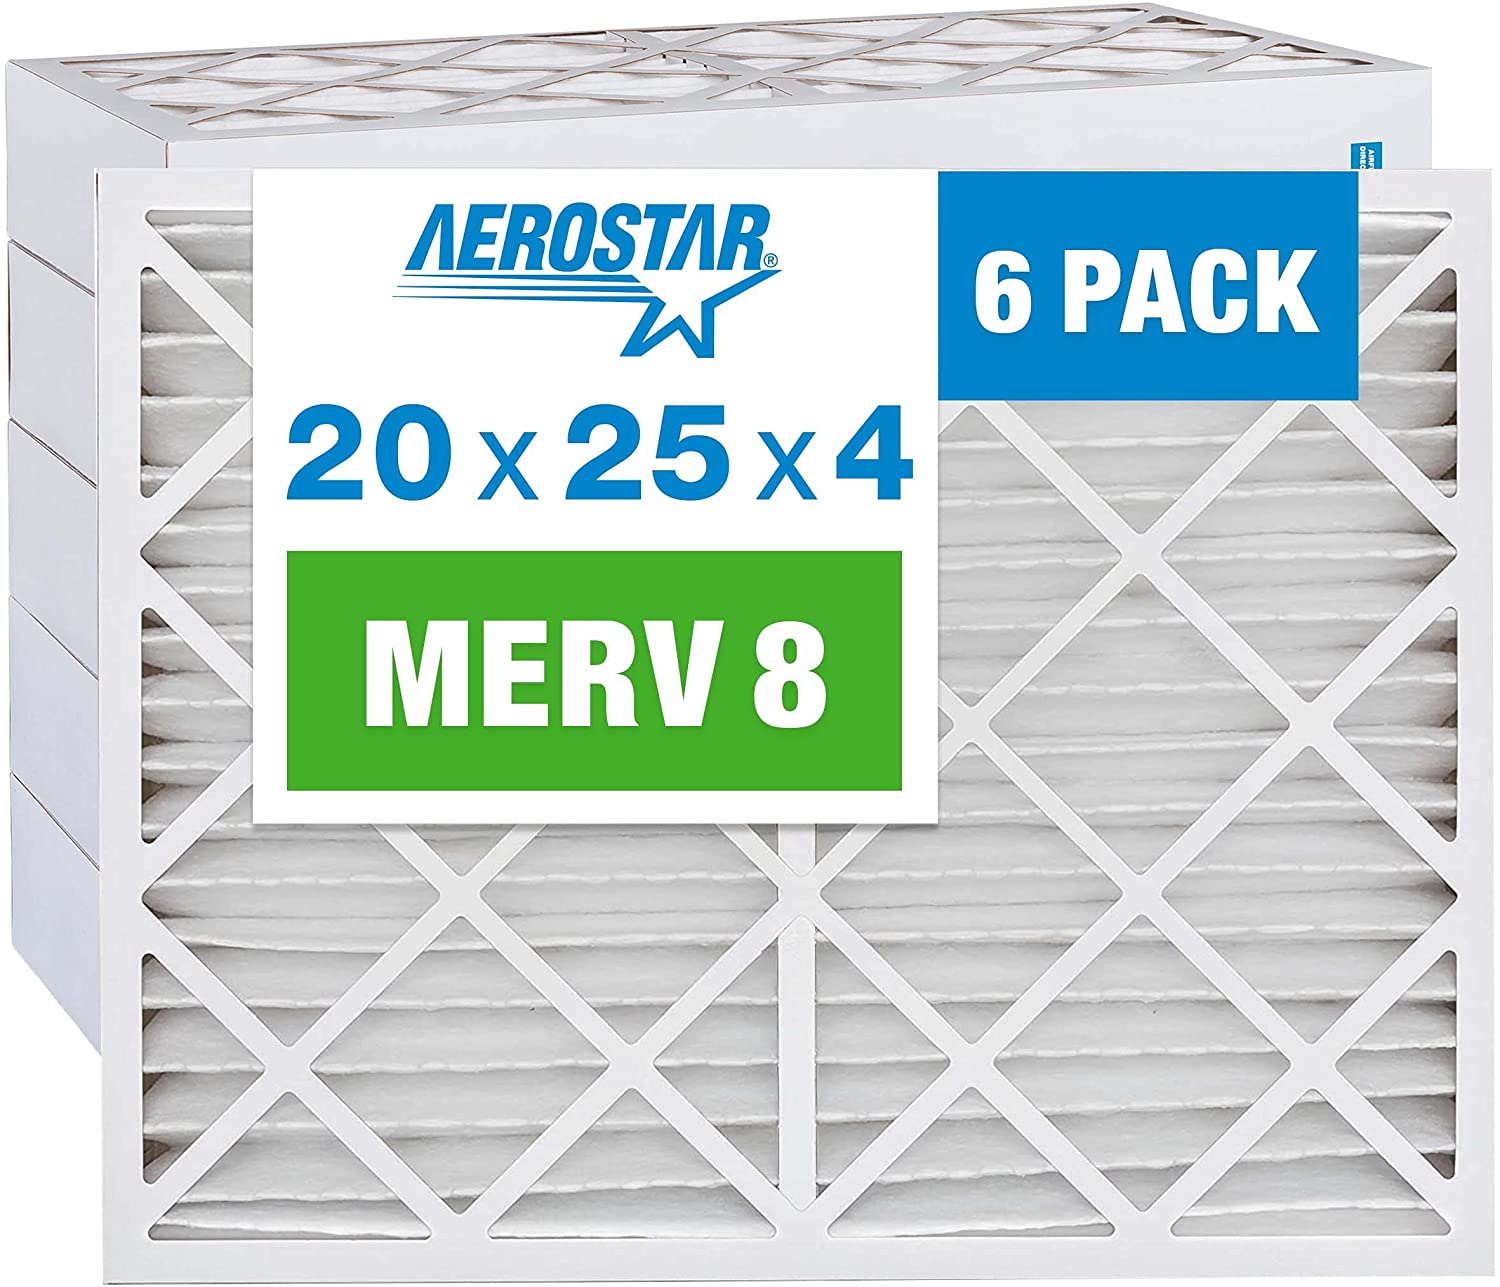 Aerostar Dust Mite Removing 20x25x4-Inch Furnace Filters, 6-Pack